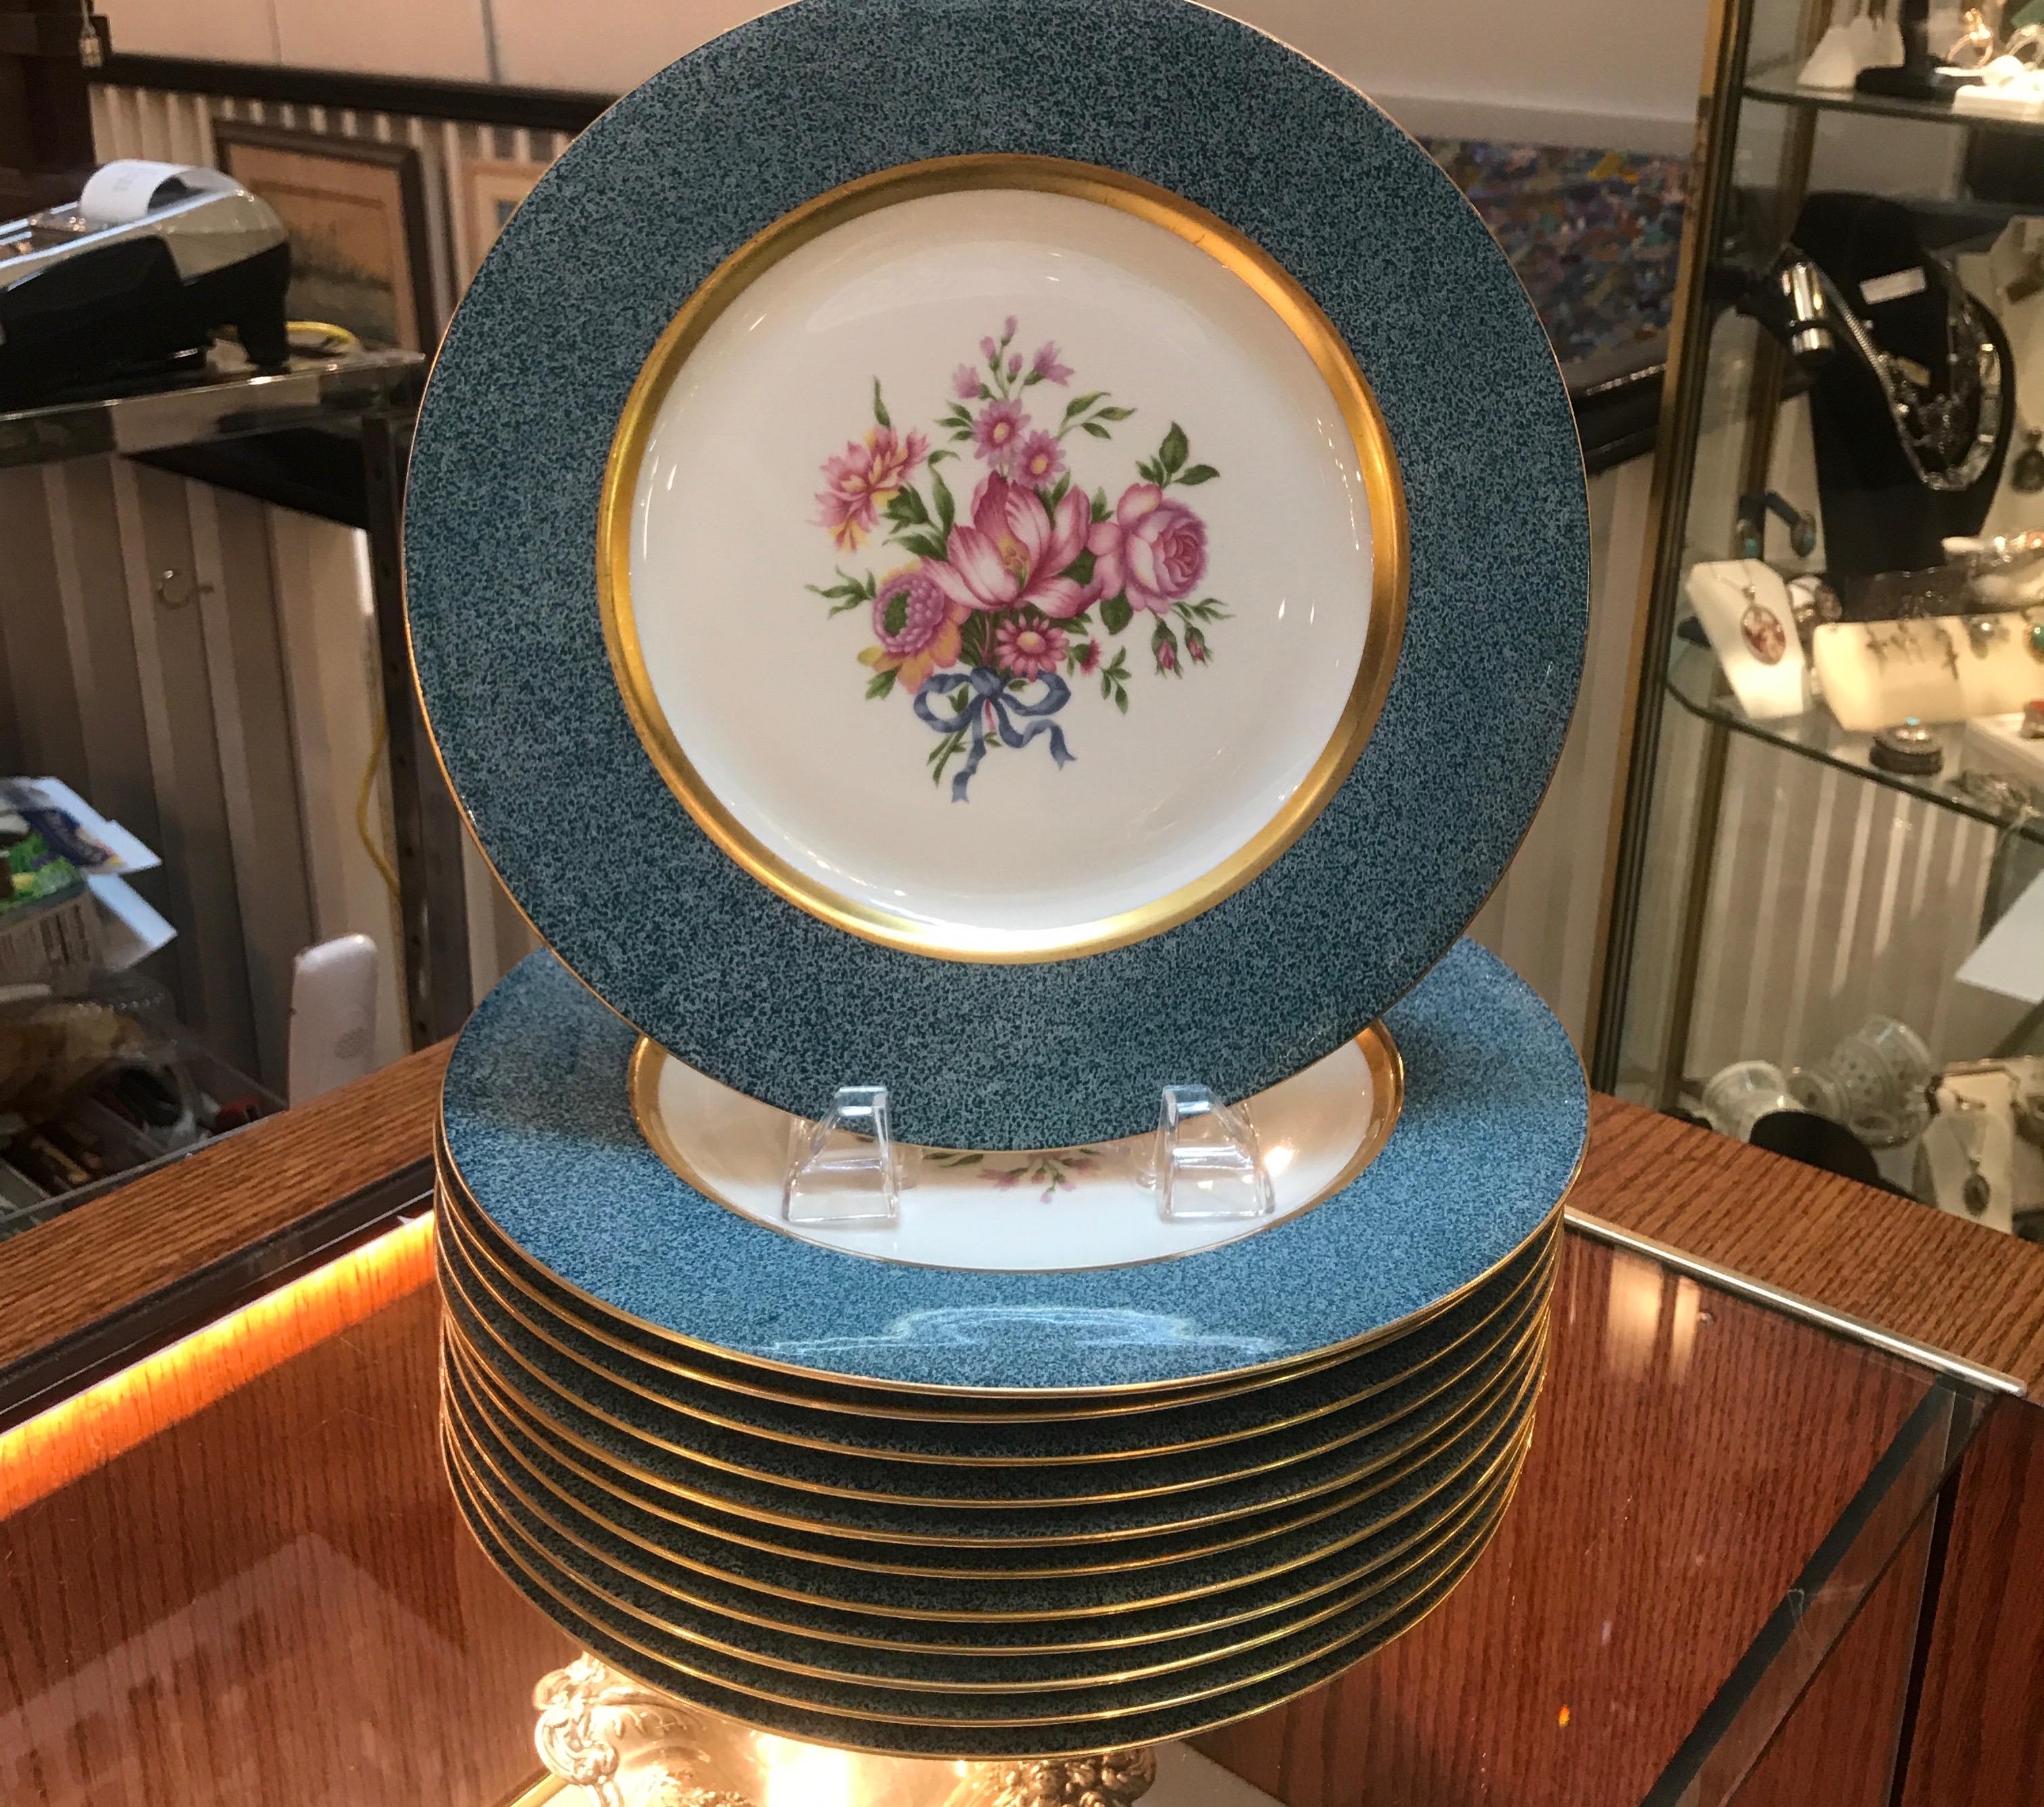 Set of 12 Theodore Haviland Floral and Gilt Service Dinner Plates 10.75 Diameter For Sale 2